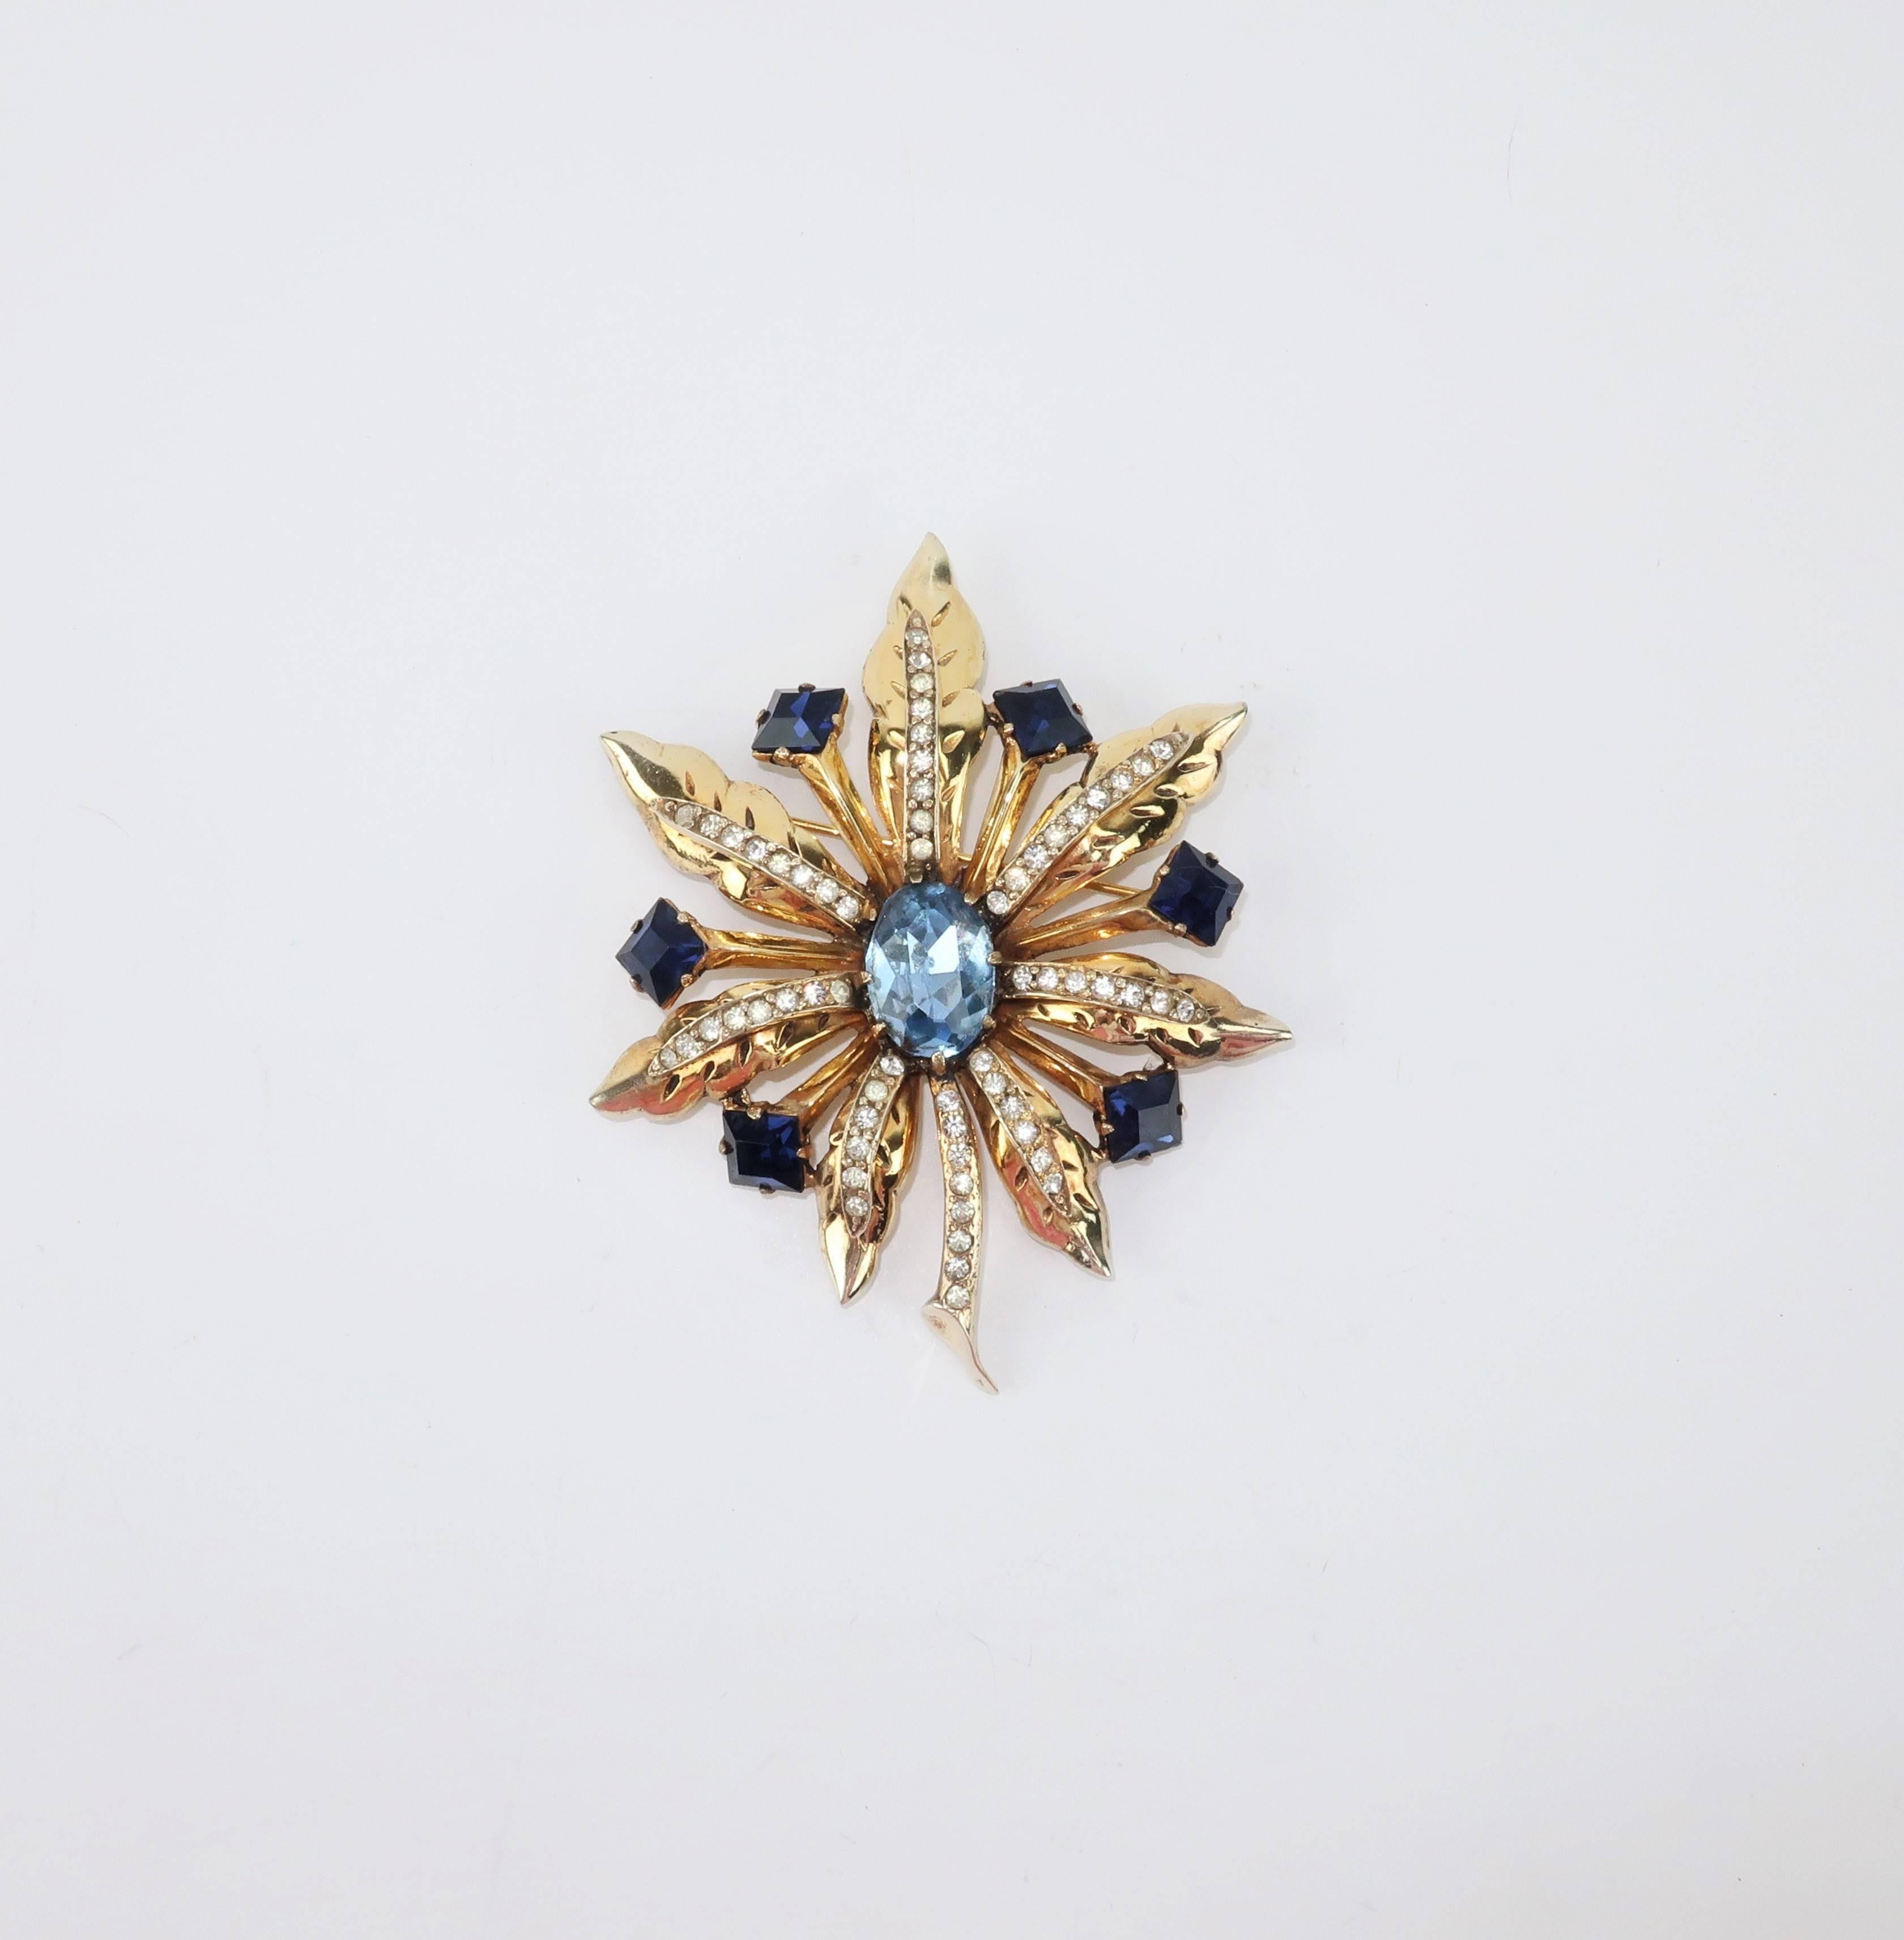 Eisenberg originally produced jewelry to accessorize their clothing line and though their fashions were popular, the brilliant pieces of costume jewelry were the real showstoppers.  This C.1940 brooch is made with all the refined details of fine